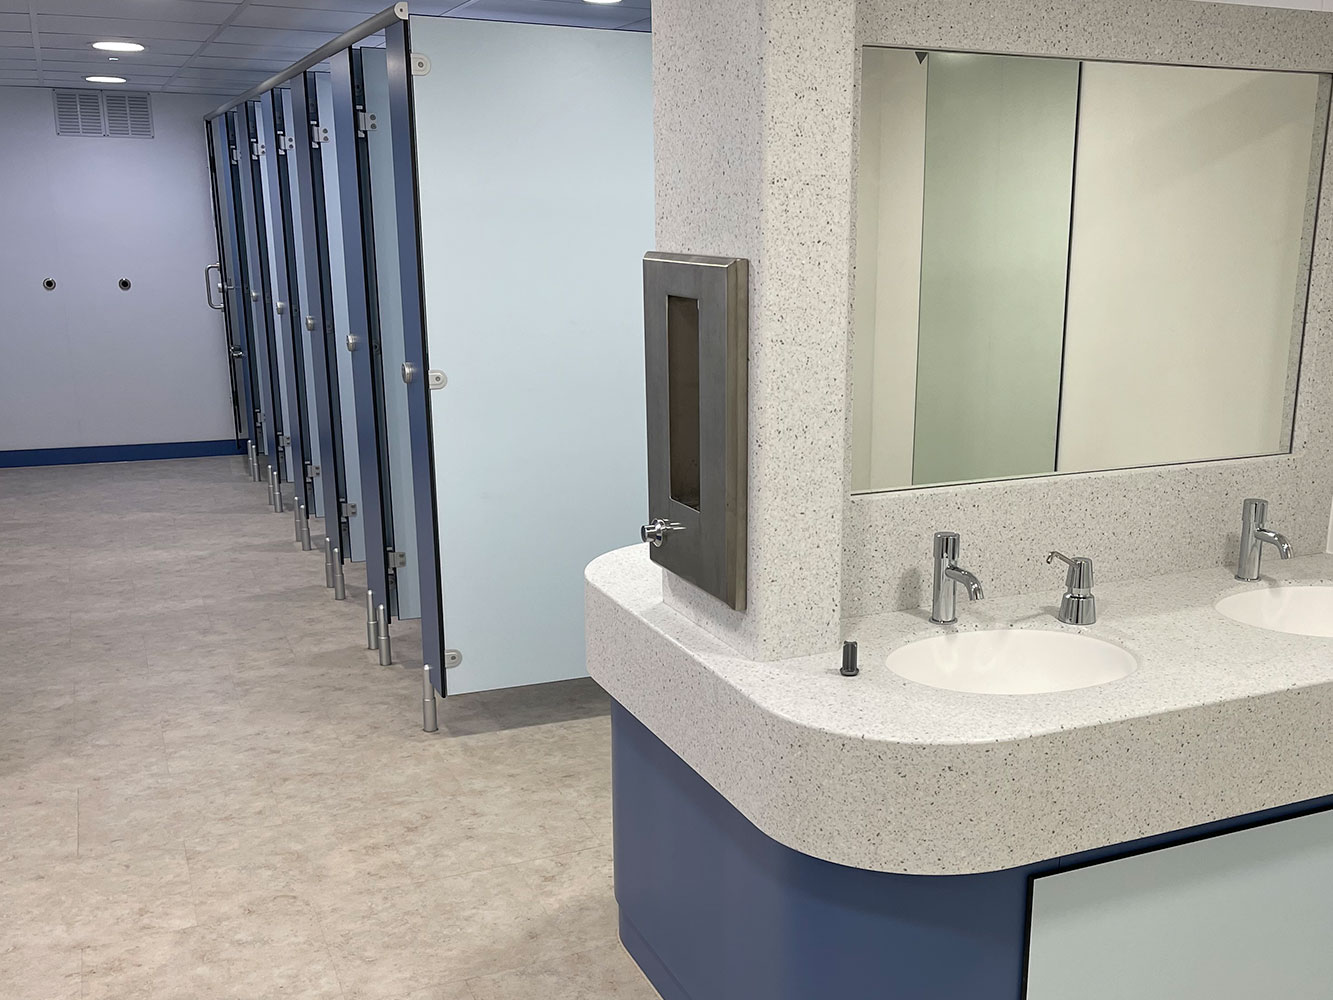 Modern toilet cubicles installed as part of a school toilet refurbishment.